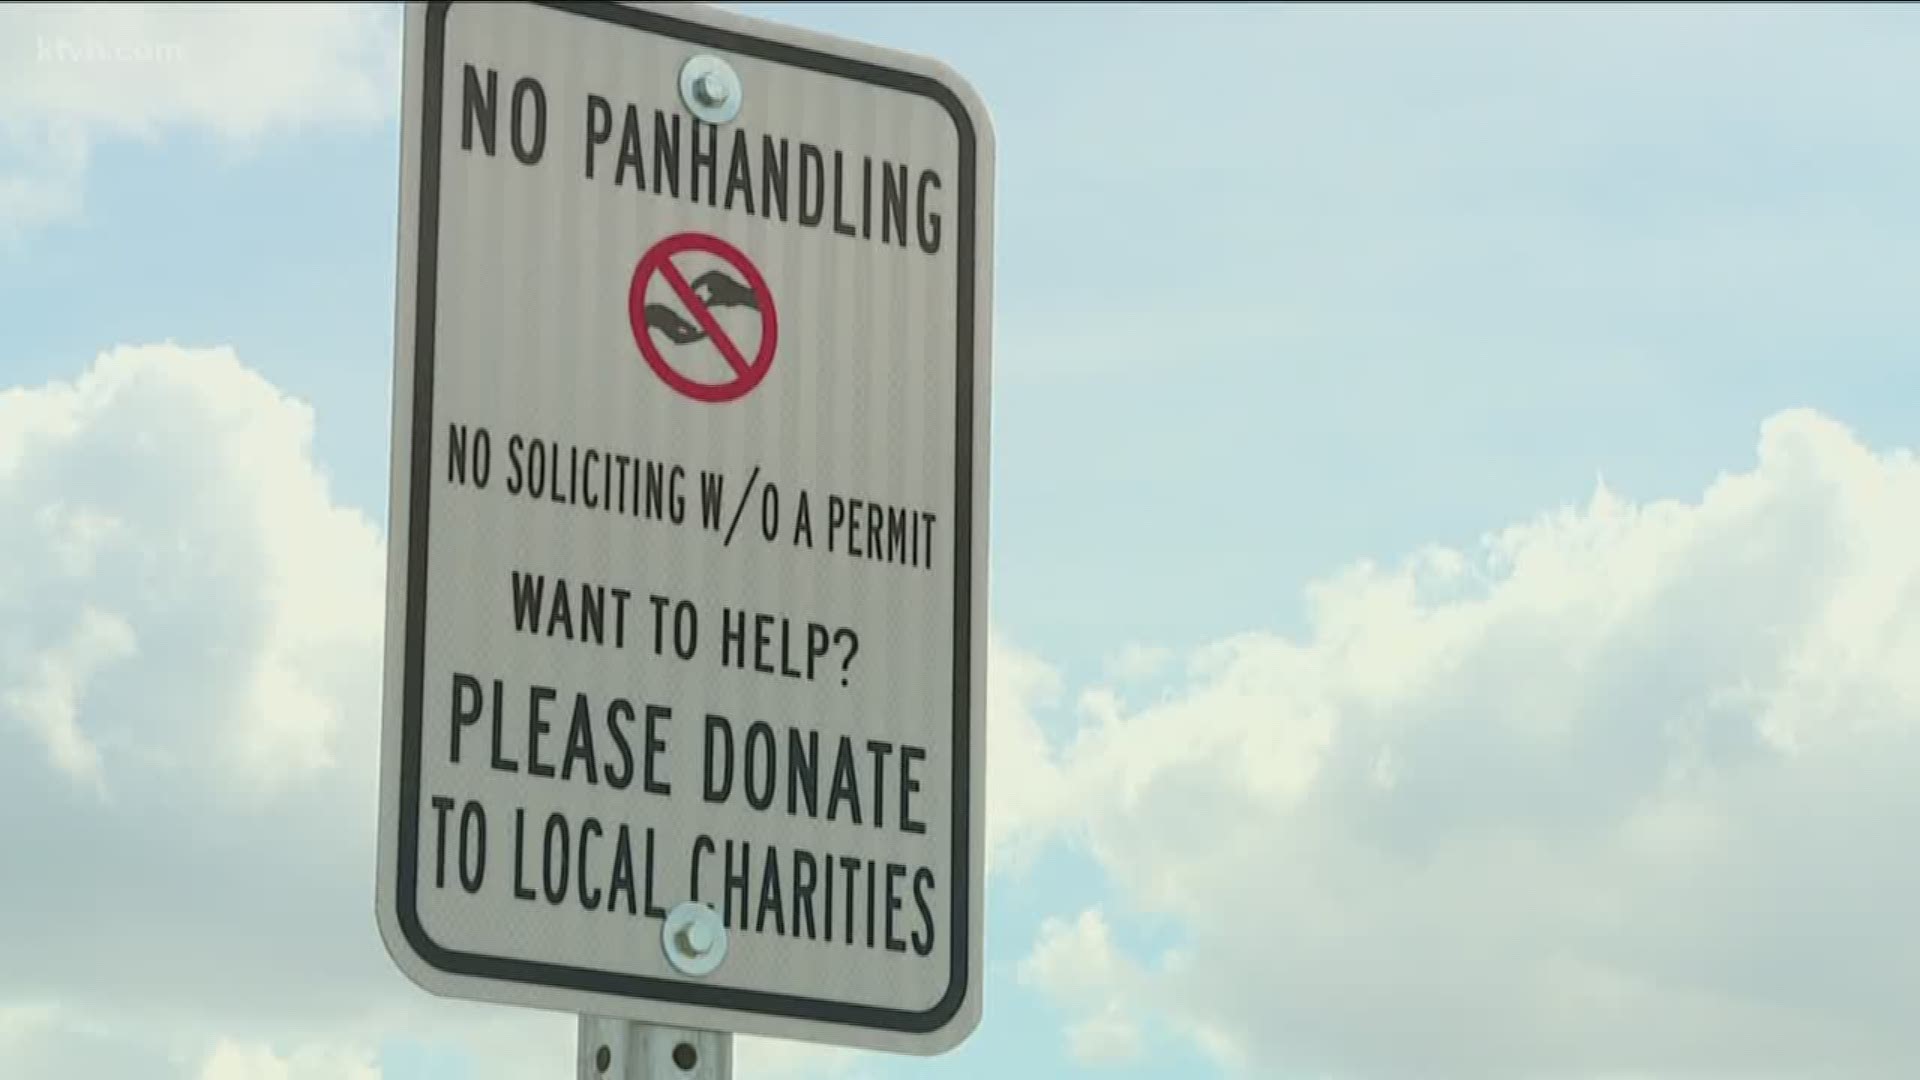 The City of Nampa recently put up signs to discourage people from panhandling - and to try and get people to donate money to charities that can help instead.